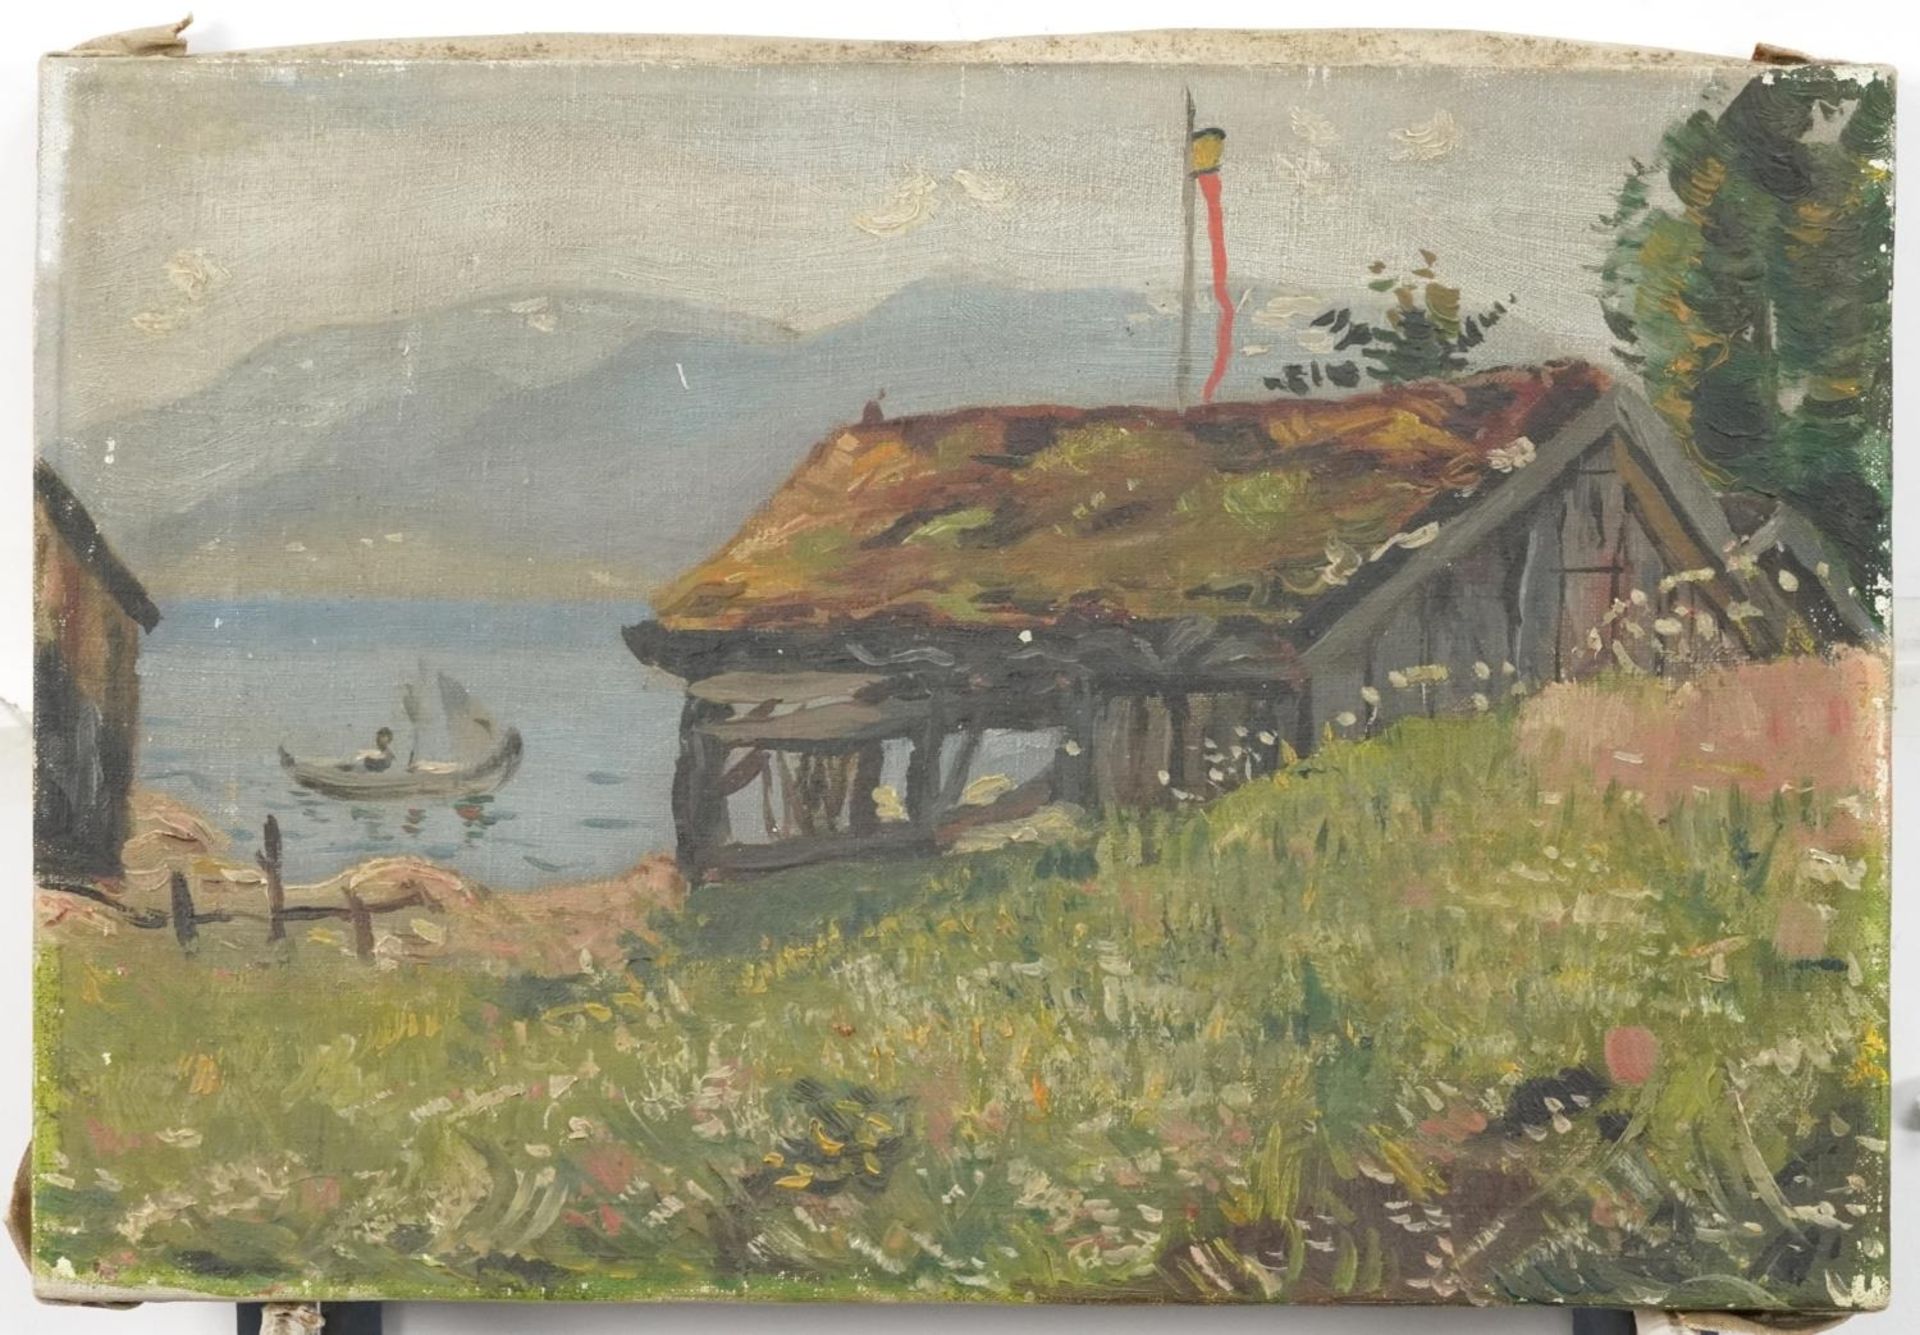 Attributed to Hans Dahl - Balestrand lake scene, late 19th/early 20th century Norwegian school oil - Image 2 of 4